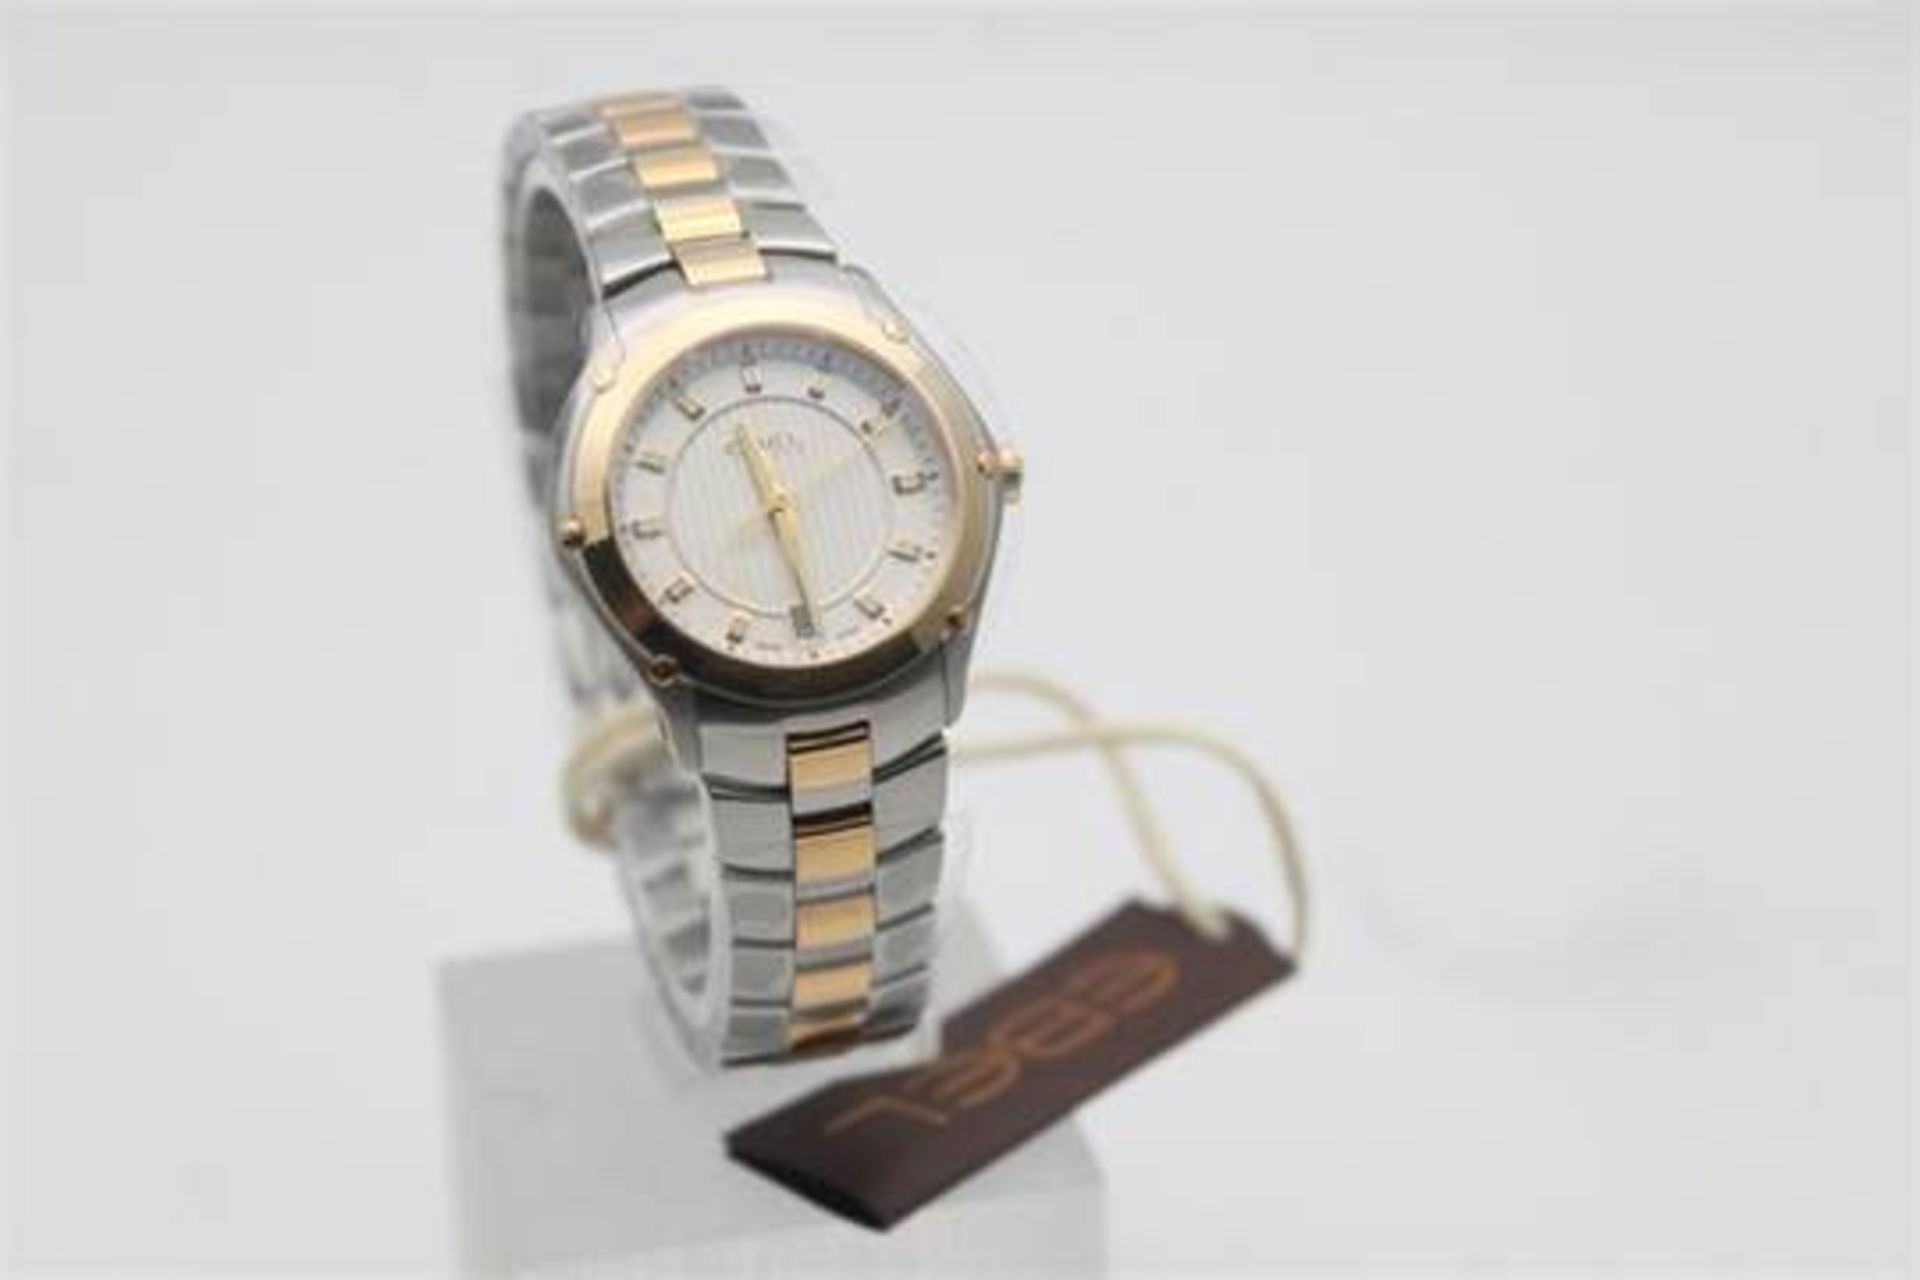 BOXED BRAND NEW WITH 2 YEARS INTERNATIONAL WARRANTY Ladies Ebel Classic Sport 18ct Gold Watch RRP £